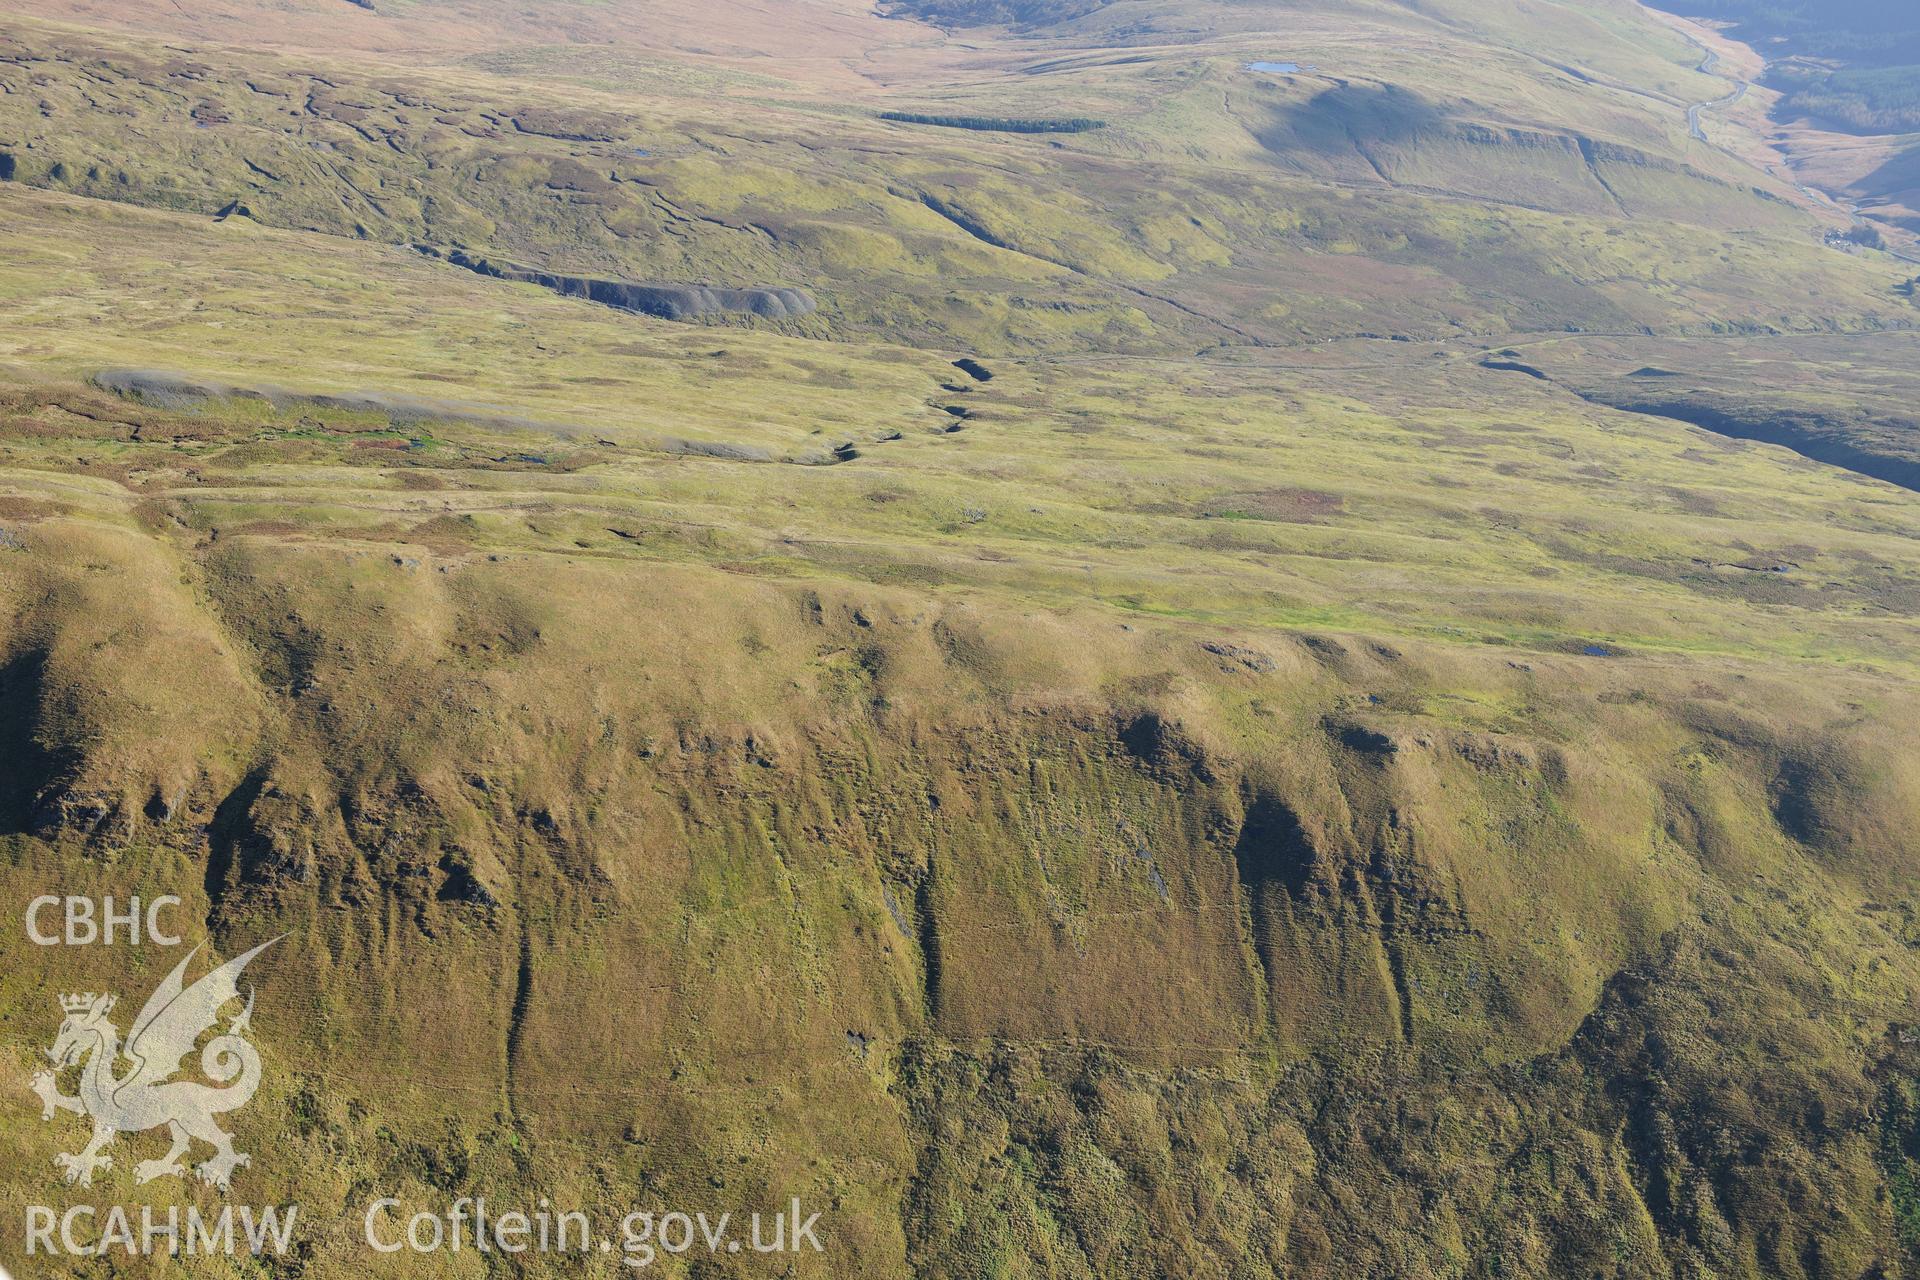 RCAHMW colour oblique photograph of Plynlimon lead mine, landscape view from west. Taken by Toby Driver on 05/11/2012.